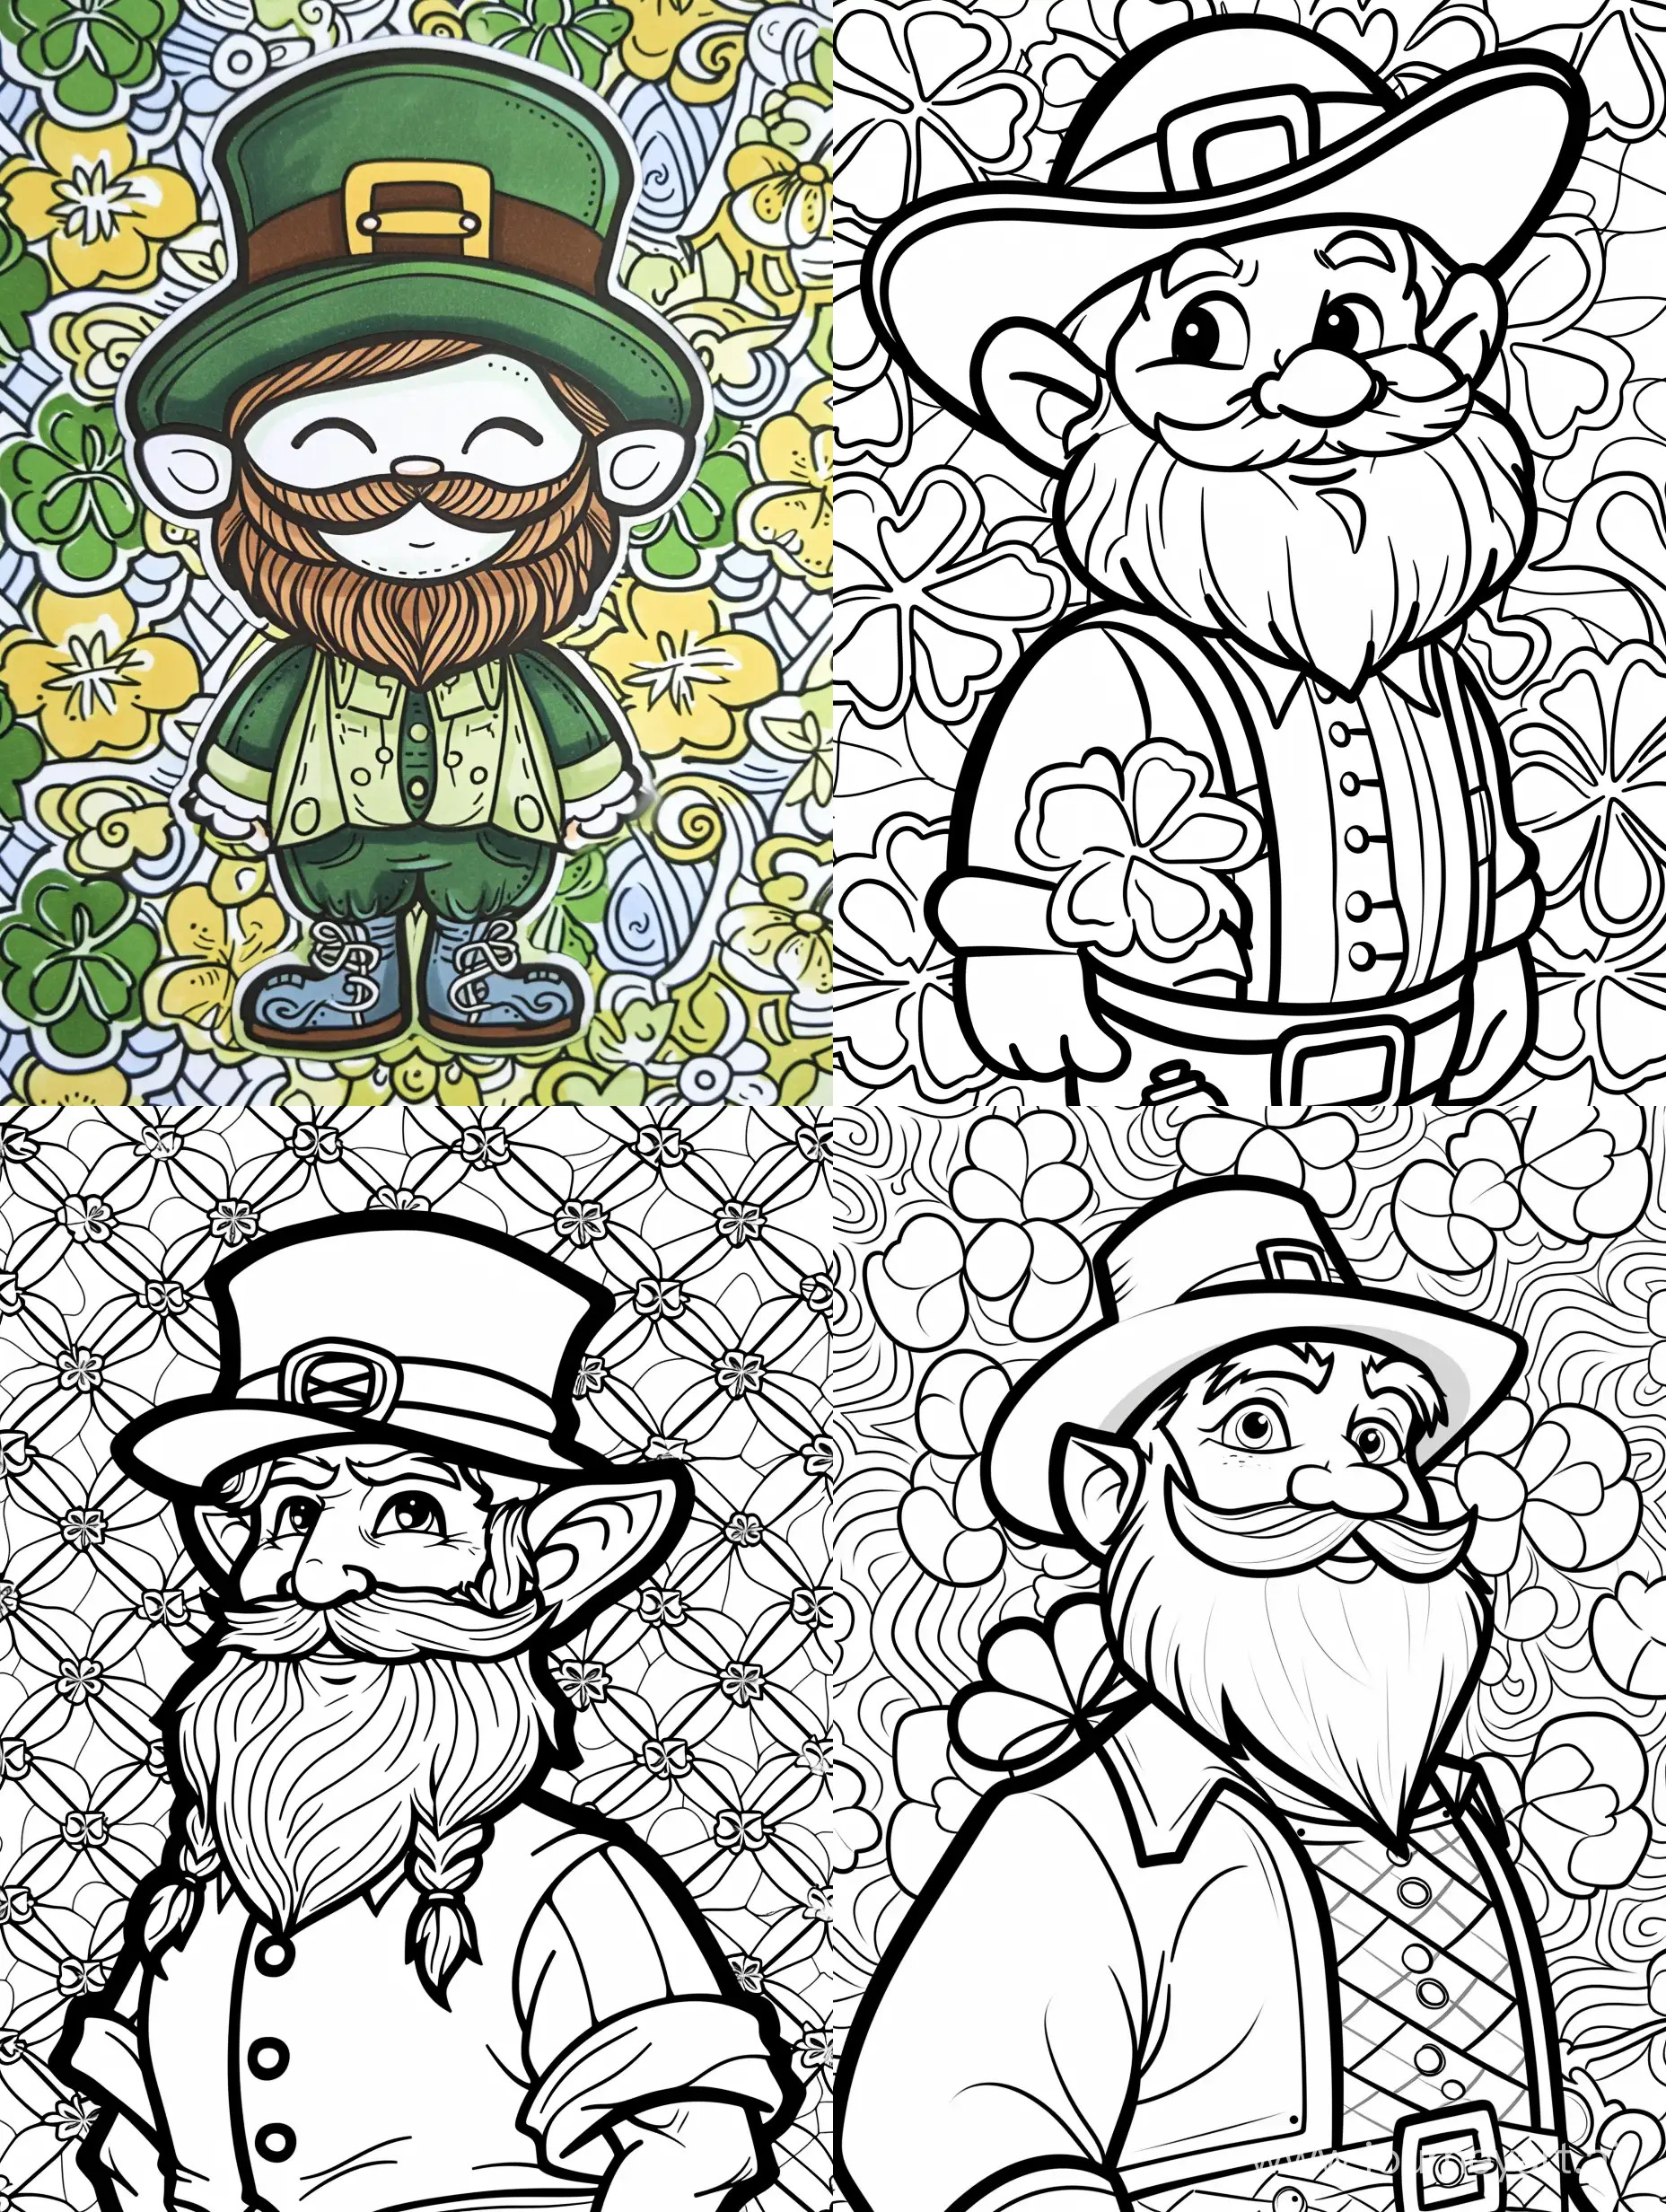 Cheerful-Leprechaun-Coloring-Page-with-Shamrock-Pattern-Background